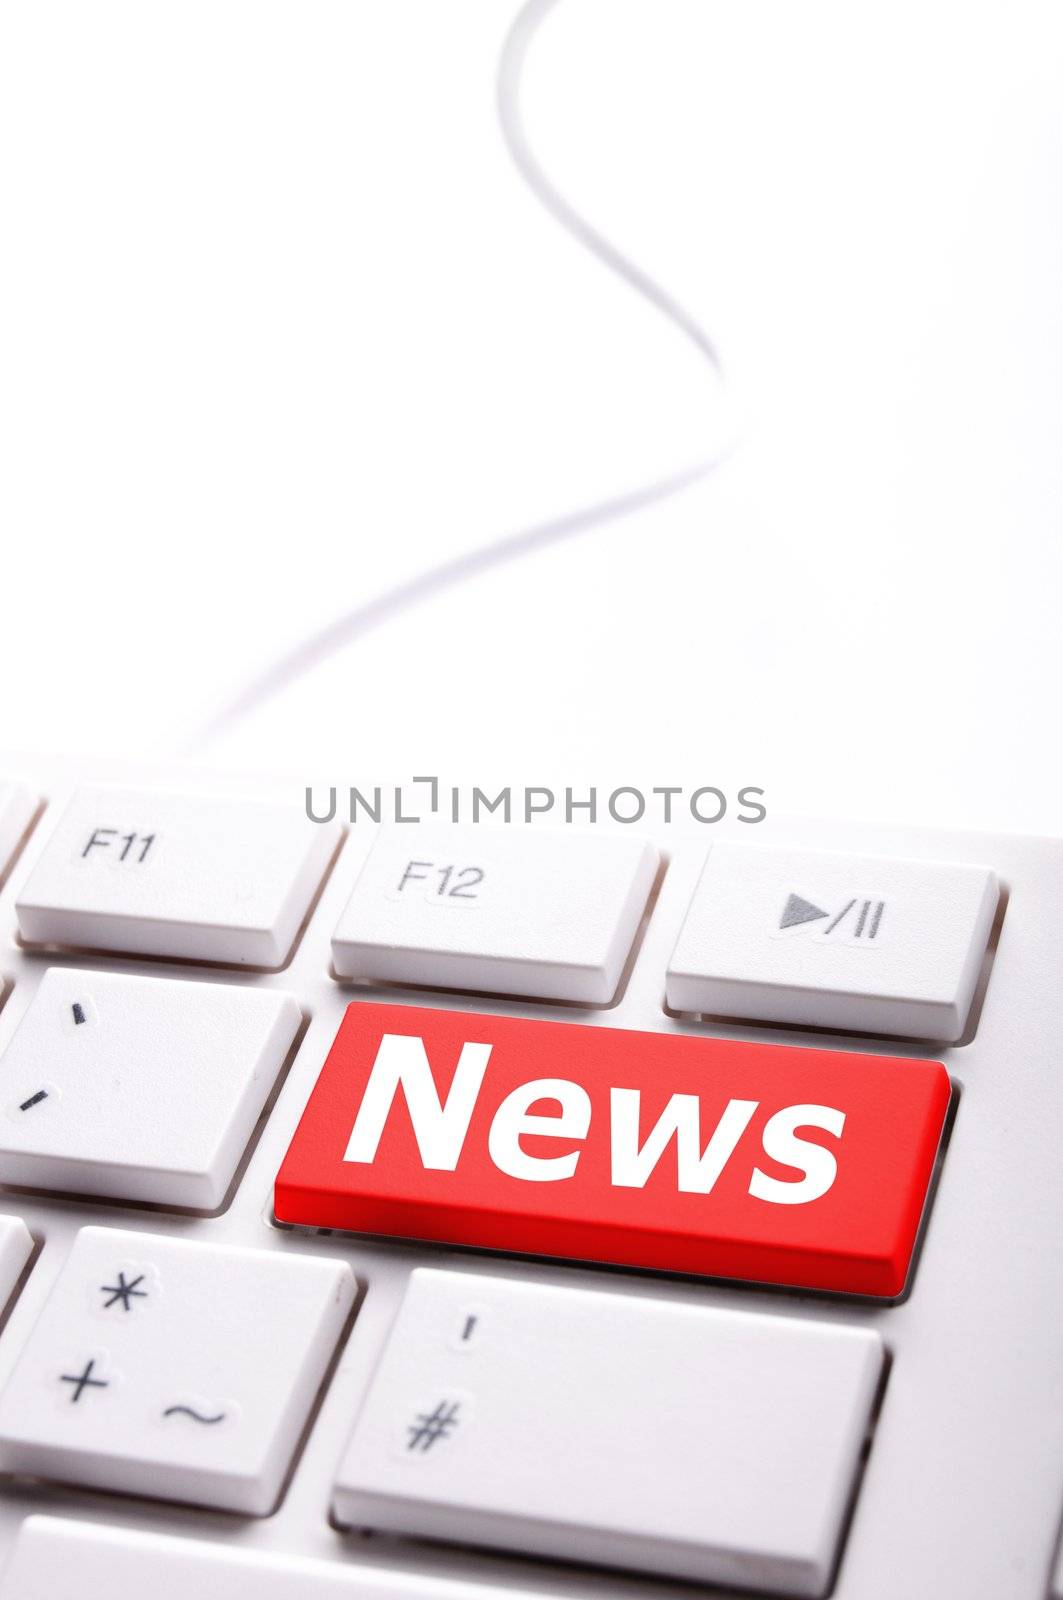 news or newsletter concept with key or keyboard from computer